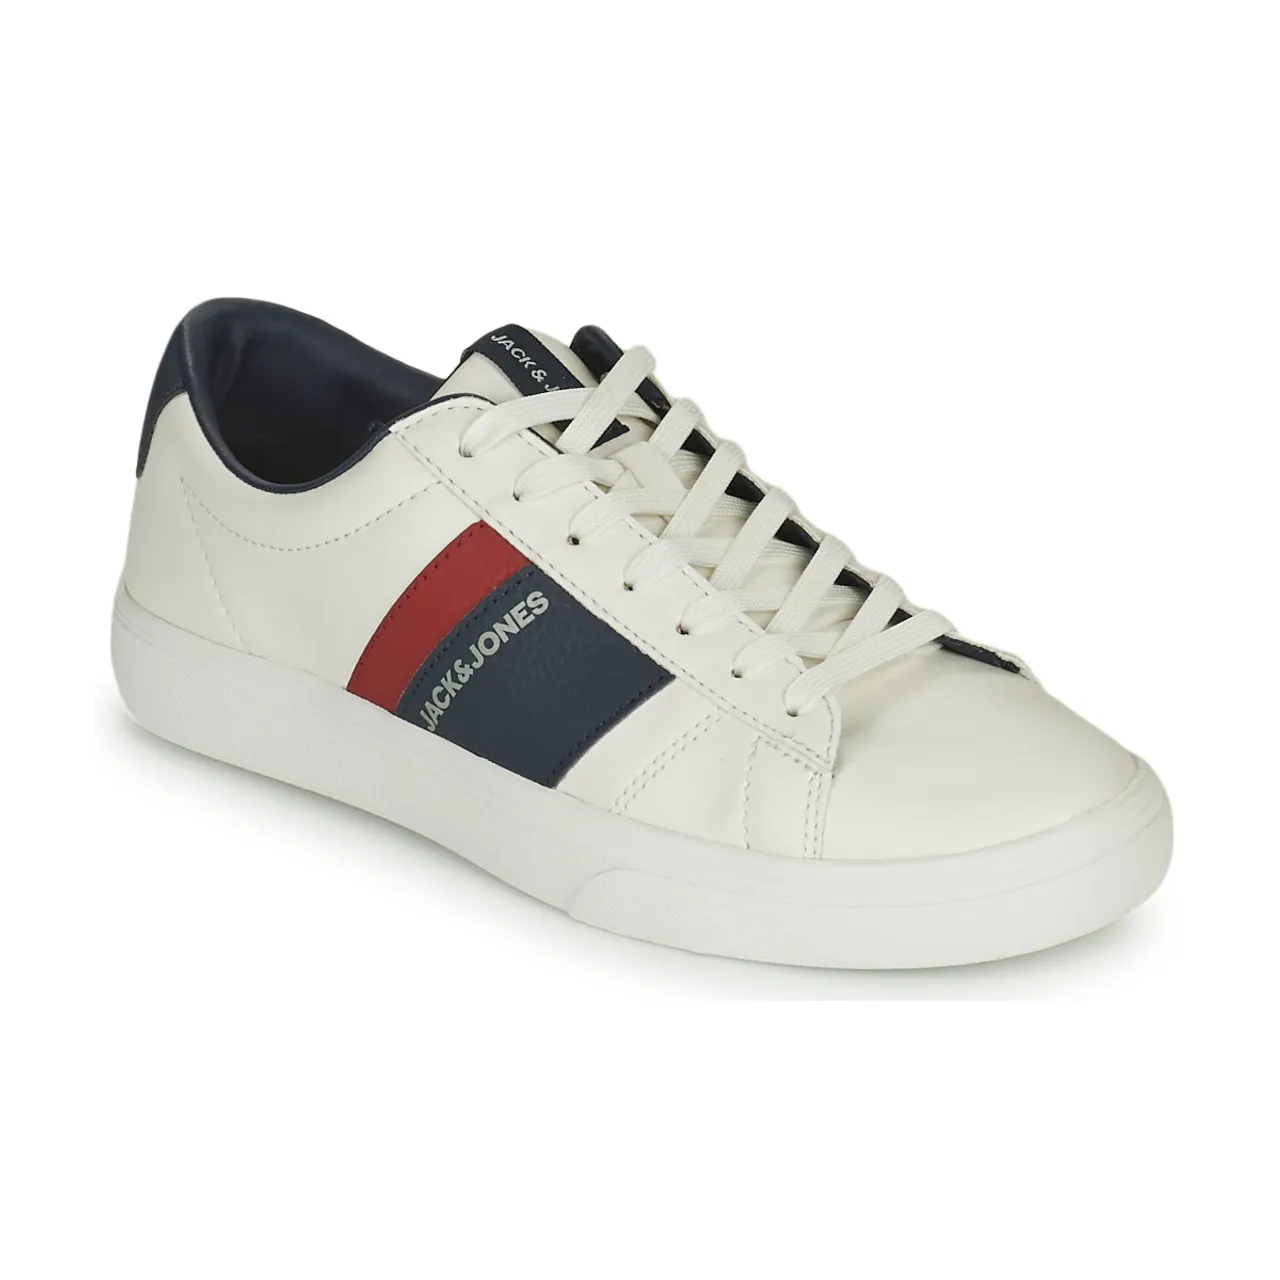 Jack & Jones  MISTRY  boys's Children's Shoes (Trainers) in White